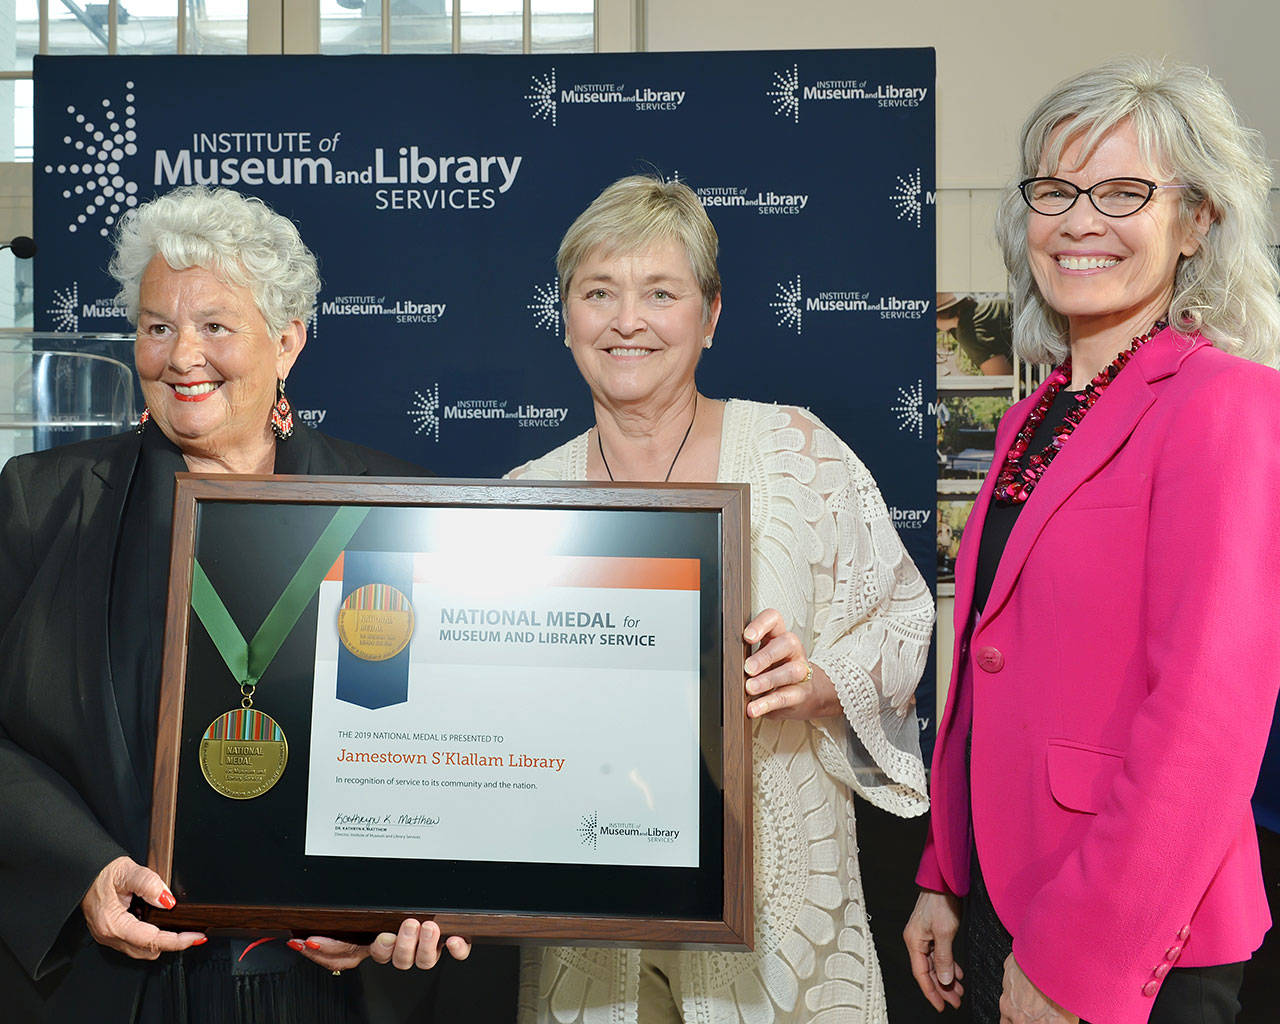 Accepting the award for the Jamestown S’Klallam Tribal Library are, from left, Liz Mueller, tribal council vice chair; and Celeste Dybeck, tribal elder. To the right is Kathryn “Kit” Matthew, director of the Institute of Museum and Library Services.